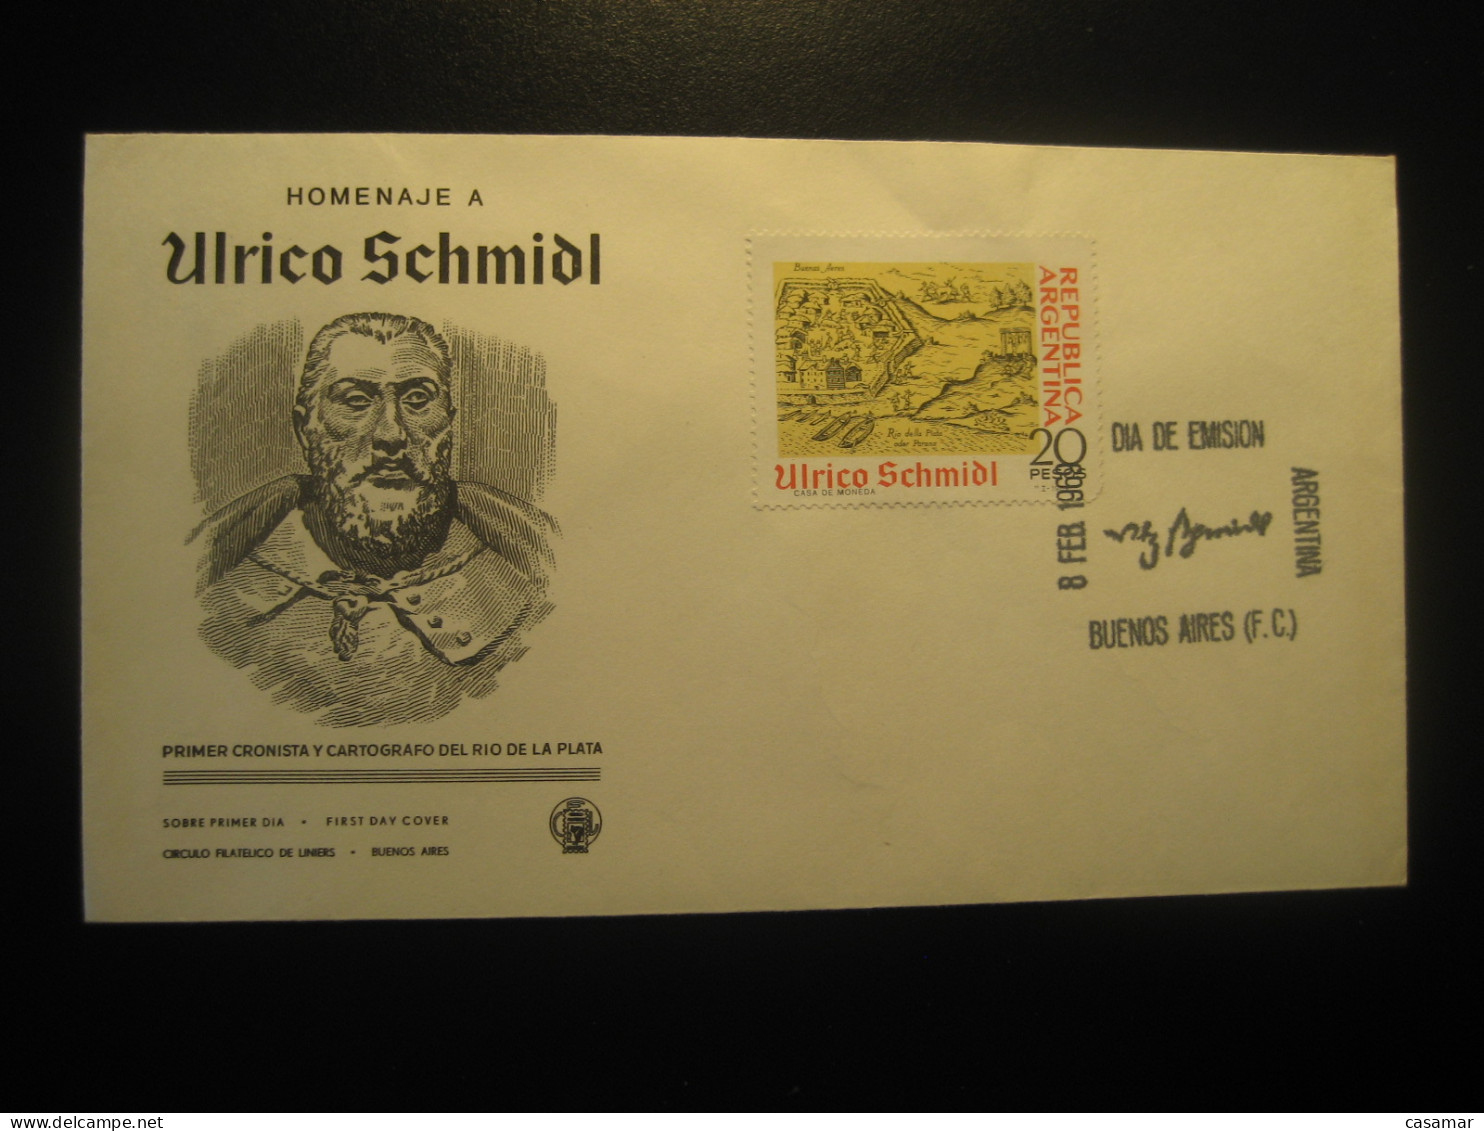 1969 Ulrico Schmidl Cartografo Cartography Cartographie Mapping Geography FDC Cancel Cover ARGENTINA Buenos Aires - Géographie